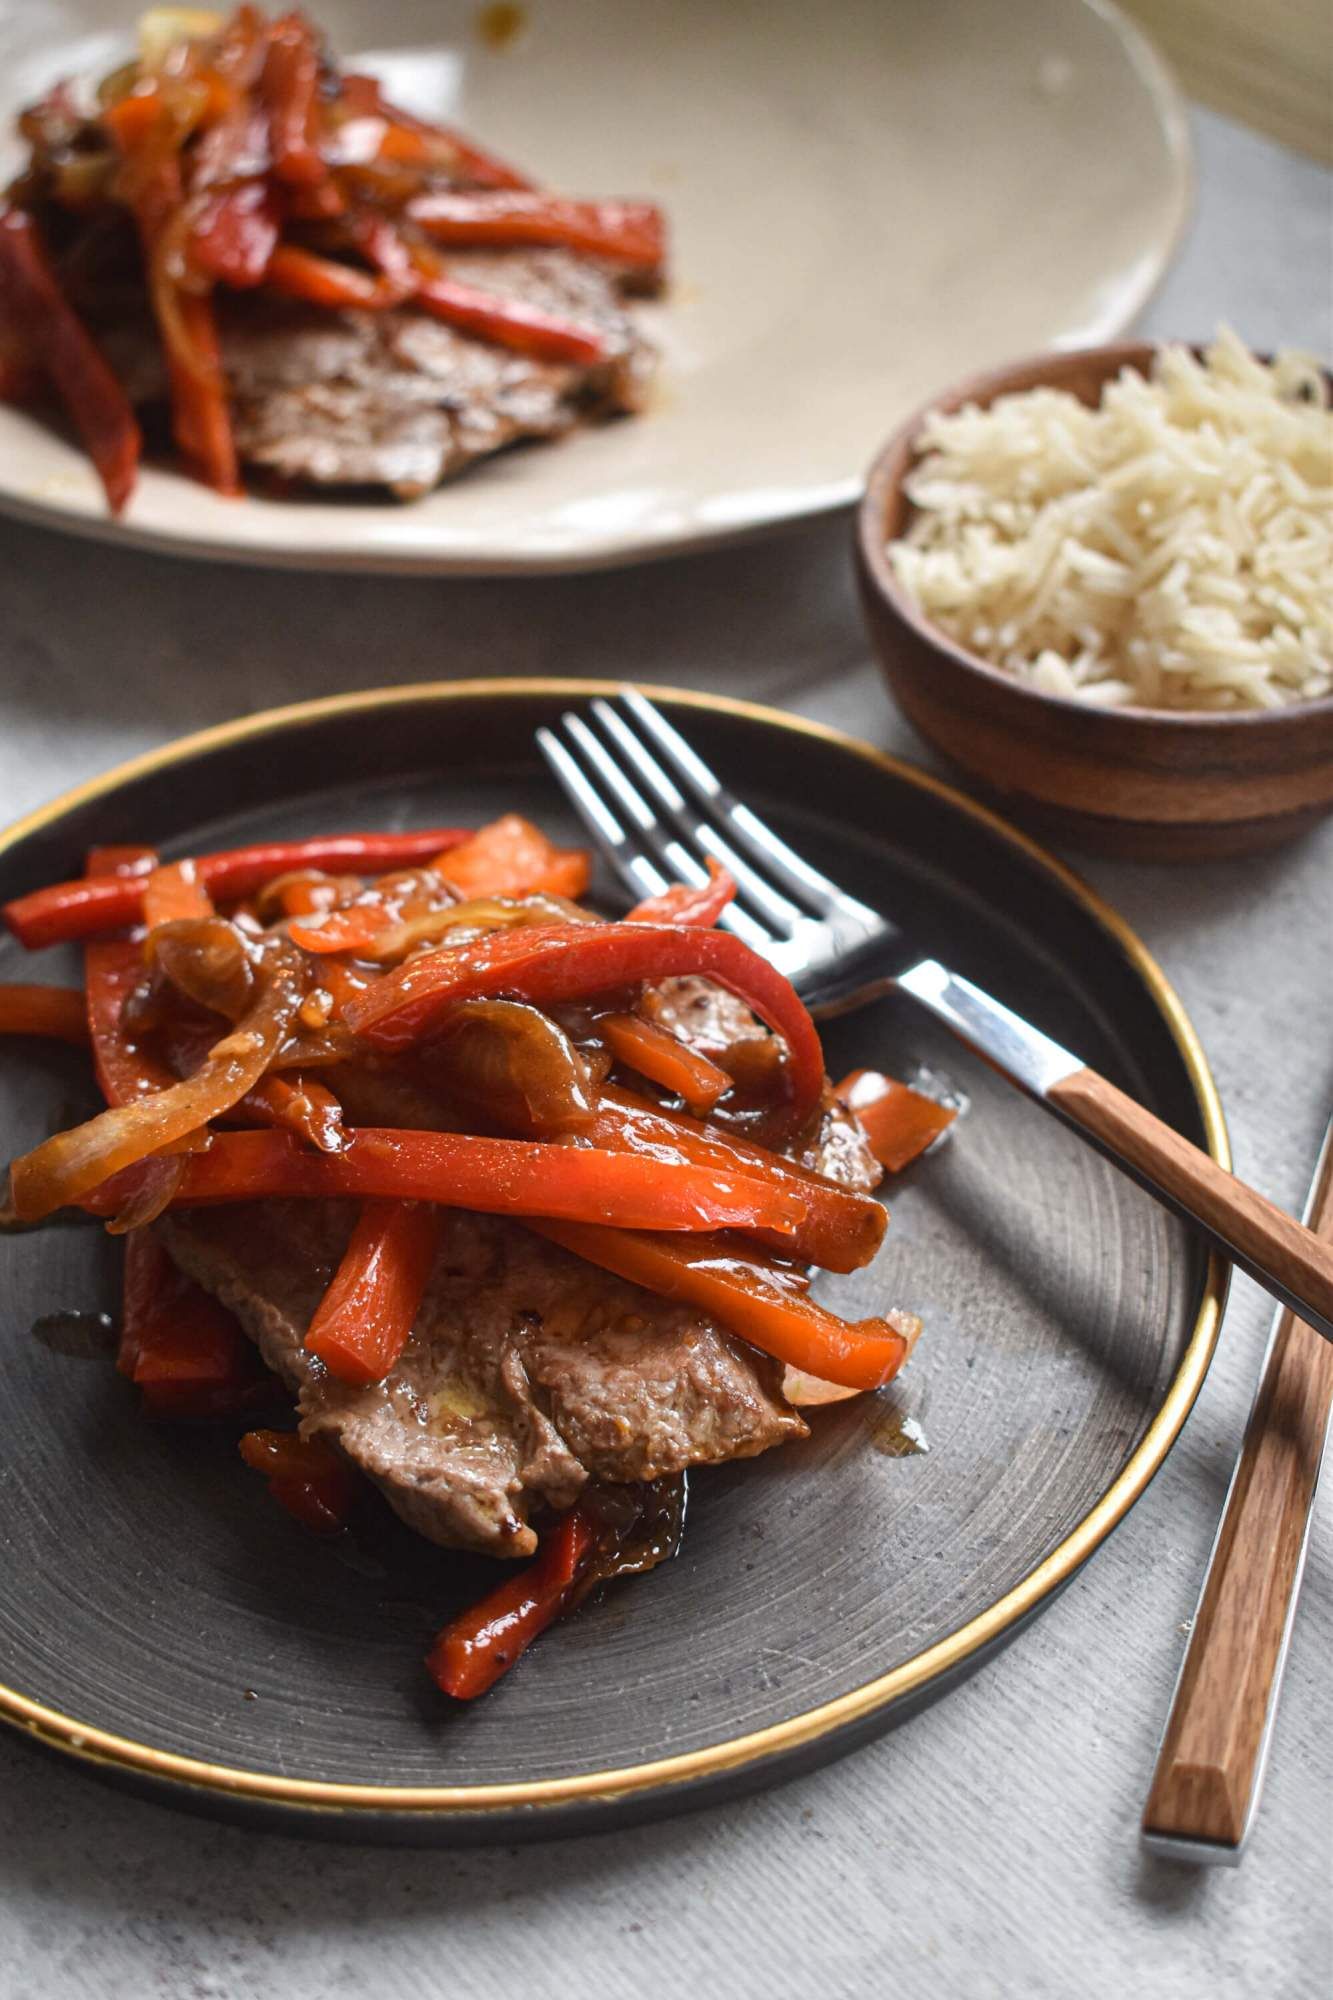 Pepper steak stir fry with a thin steak piled with peppers and onions on a plate with a fork and knife.